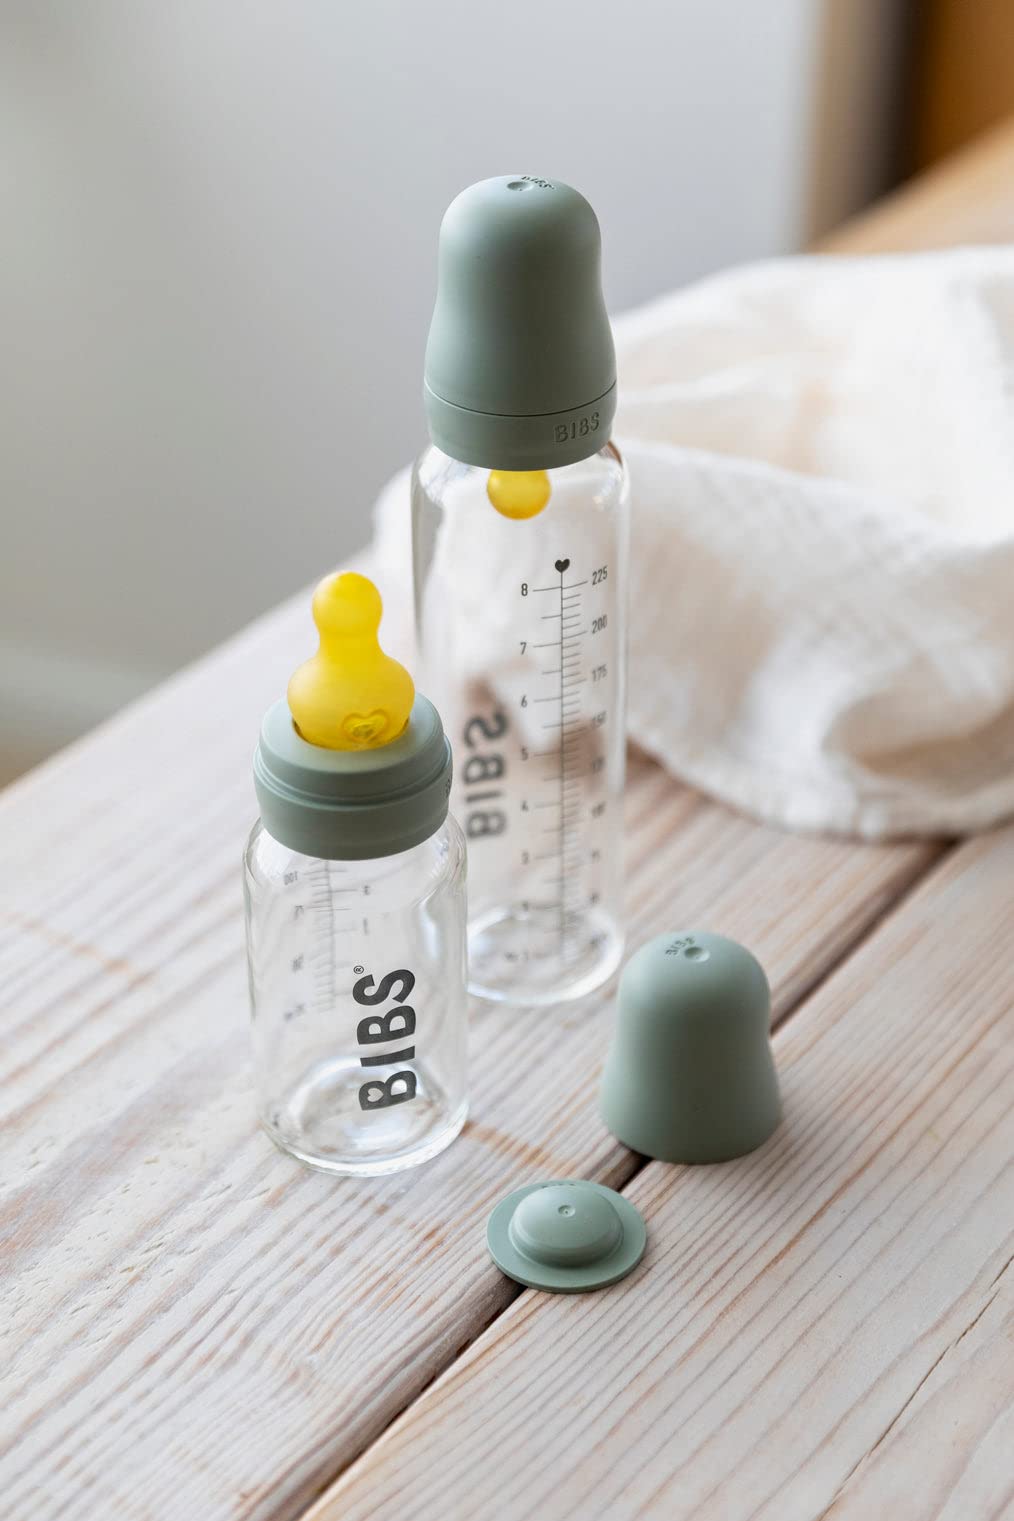 BIBS Glass Bottle - Part of Set. Mix and Match with BIBS Colorful Bottle Kits., 225 ml, Single Glass Bottle